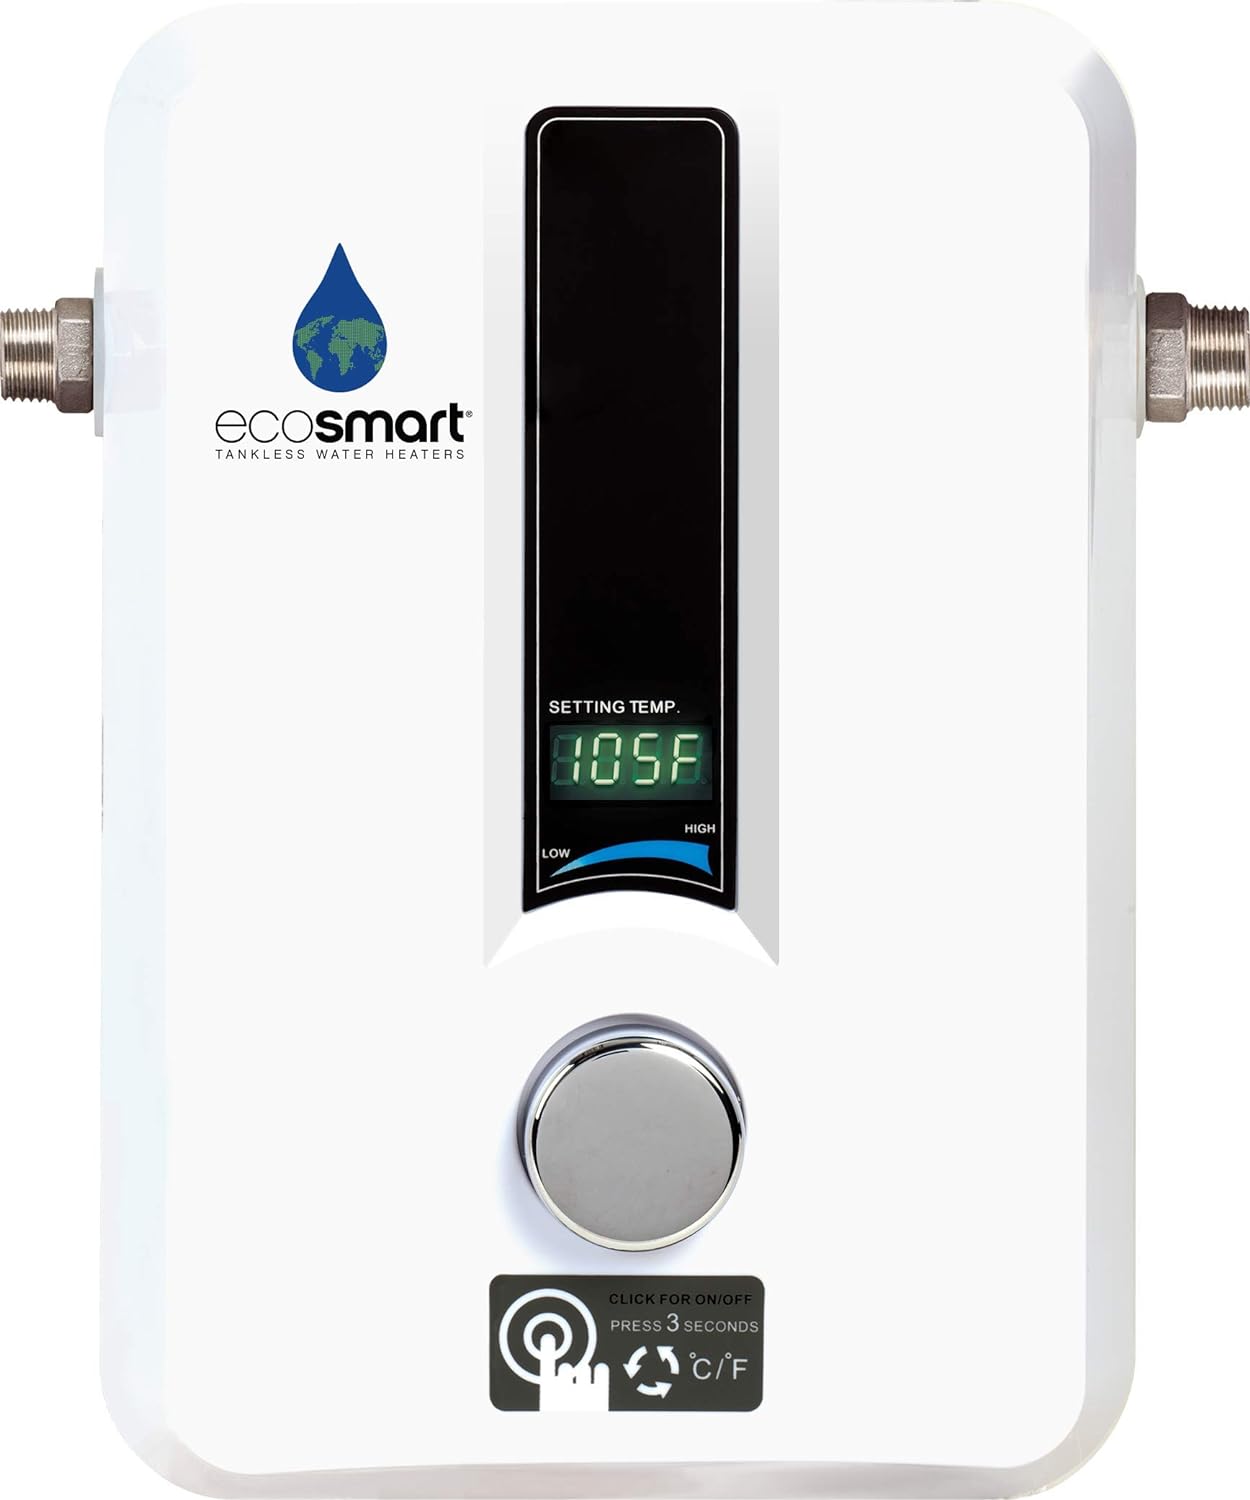 EcoSmart ECO 11 Electric Tankless Water Heater, 13KW at 240 Volts with Patented Self Modulating Technology - EcoSmart ECO 11 Electric Tankless Water Heater Review